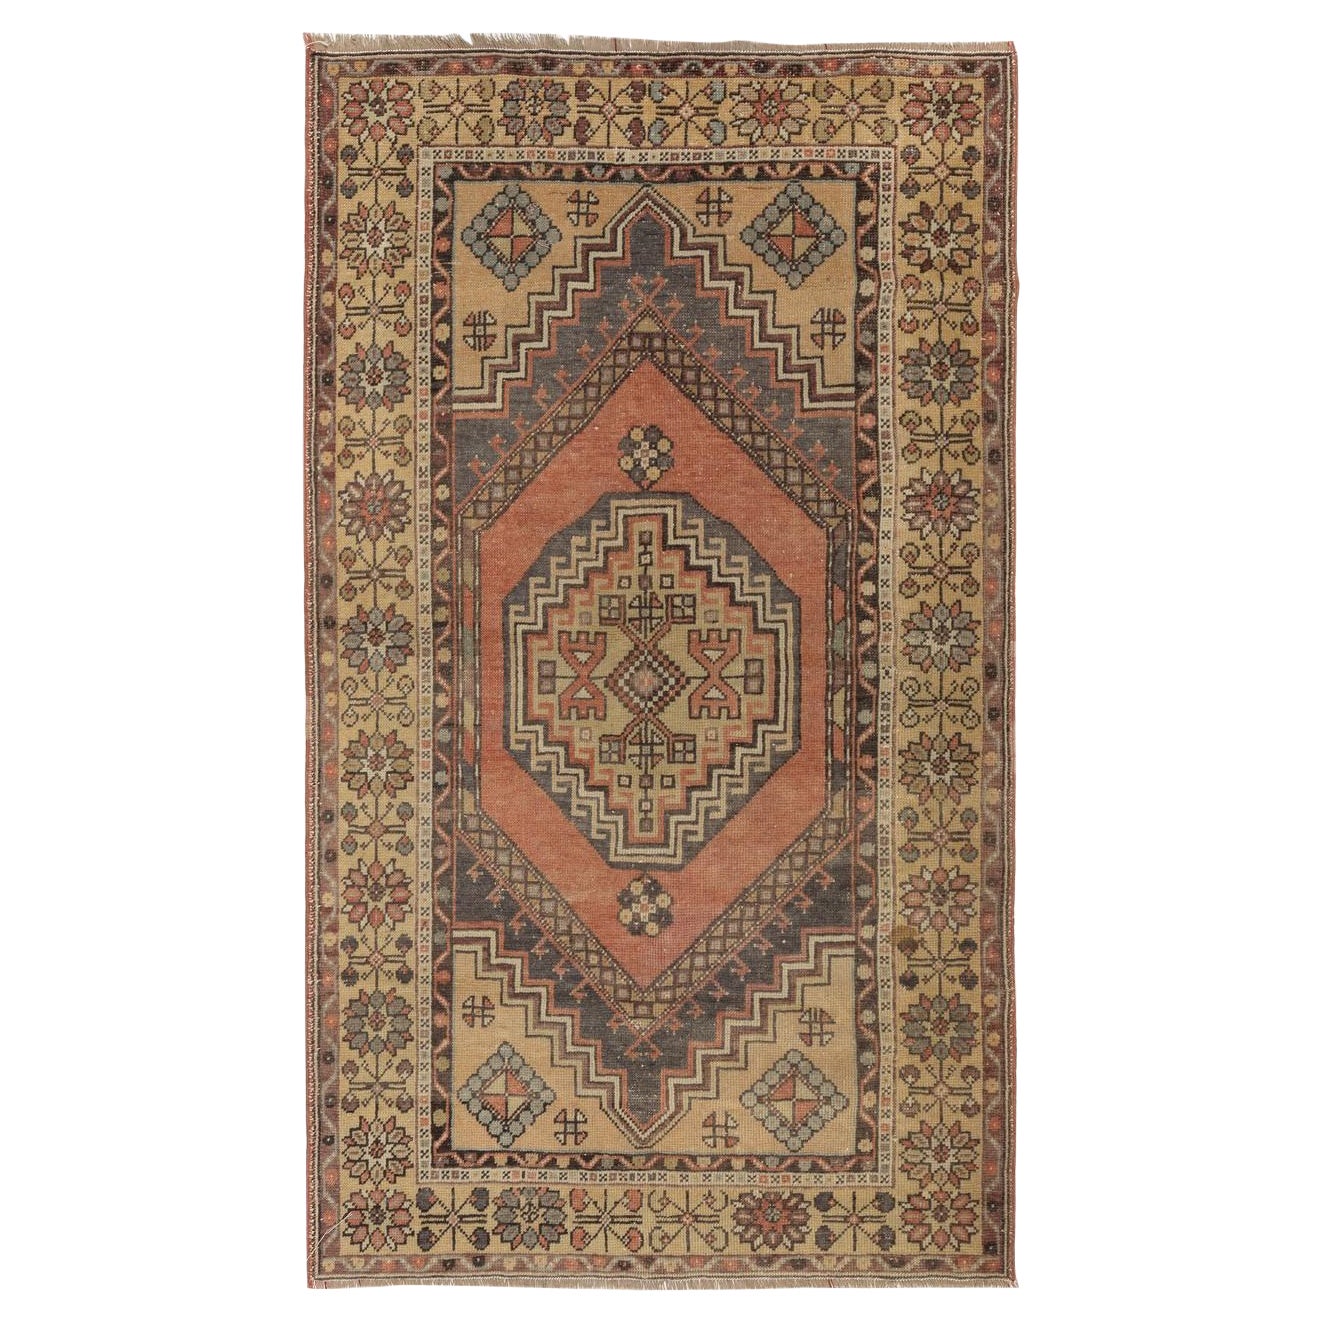 3.7x5.8 Ft Beautiful Vintage Oriental Rug Handmade Wool Carpet with Tribal Style For Sale